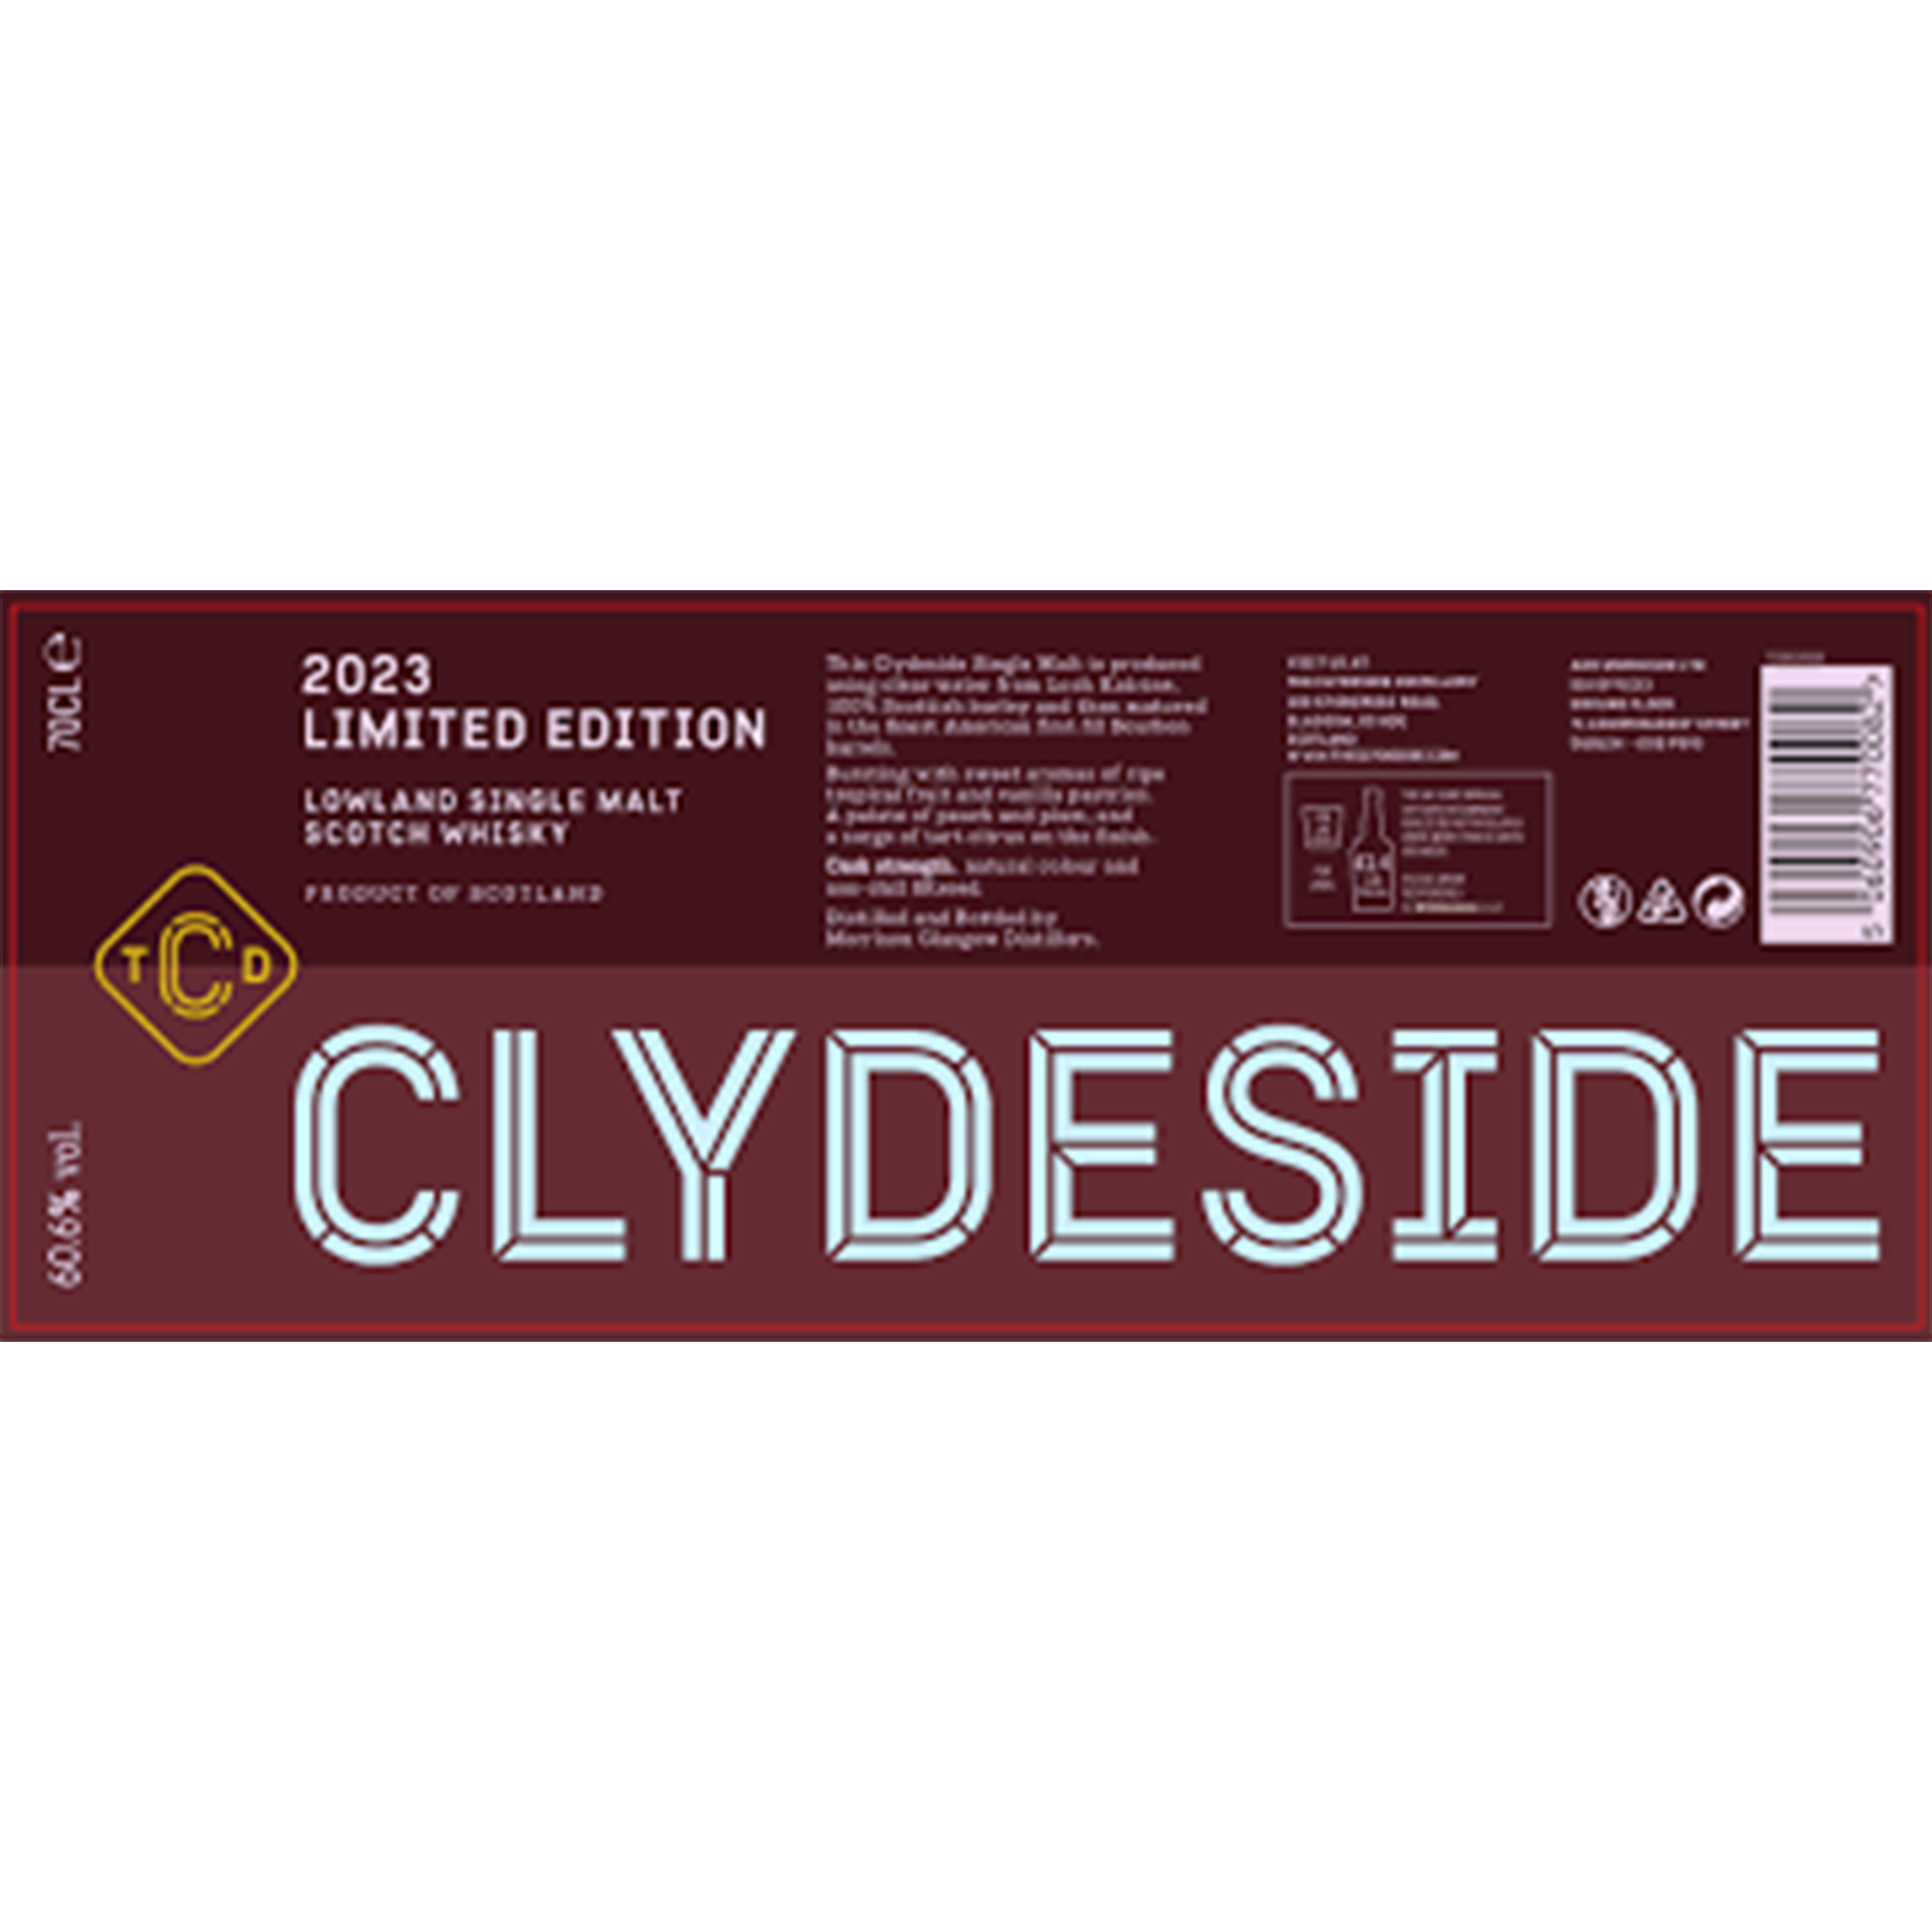 Clydeside 2023 Limited Edition Lowland Single Malt Scotch Whisky